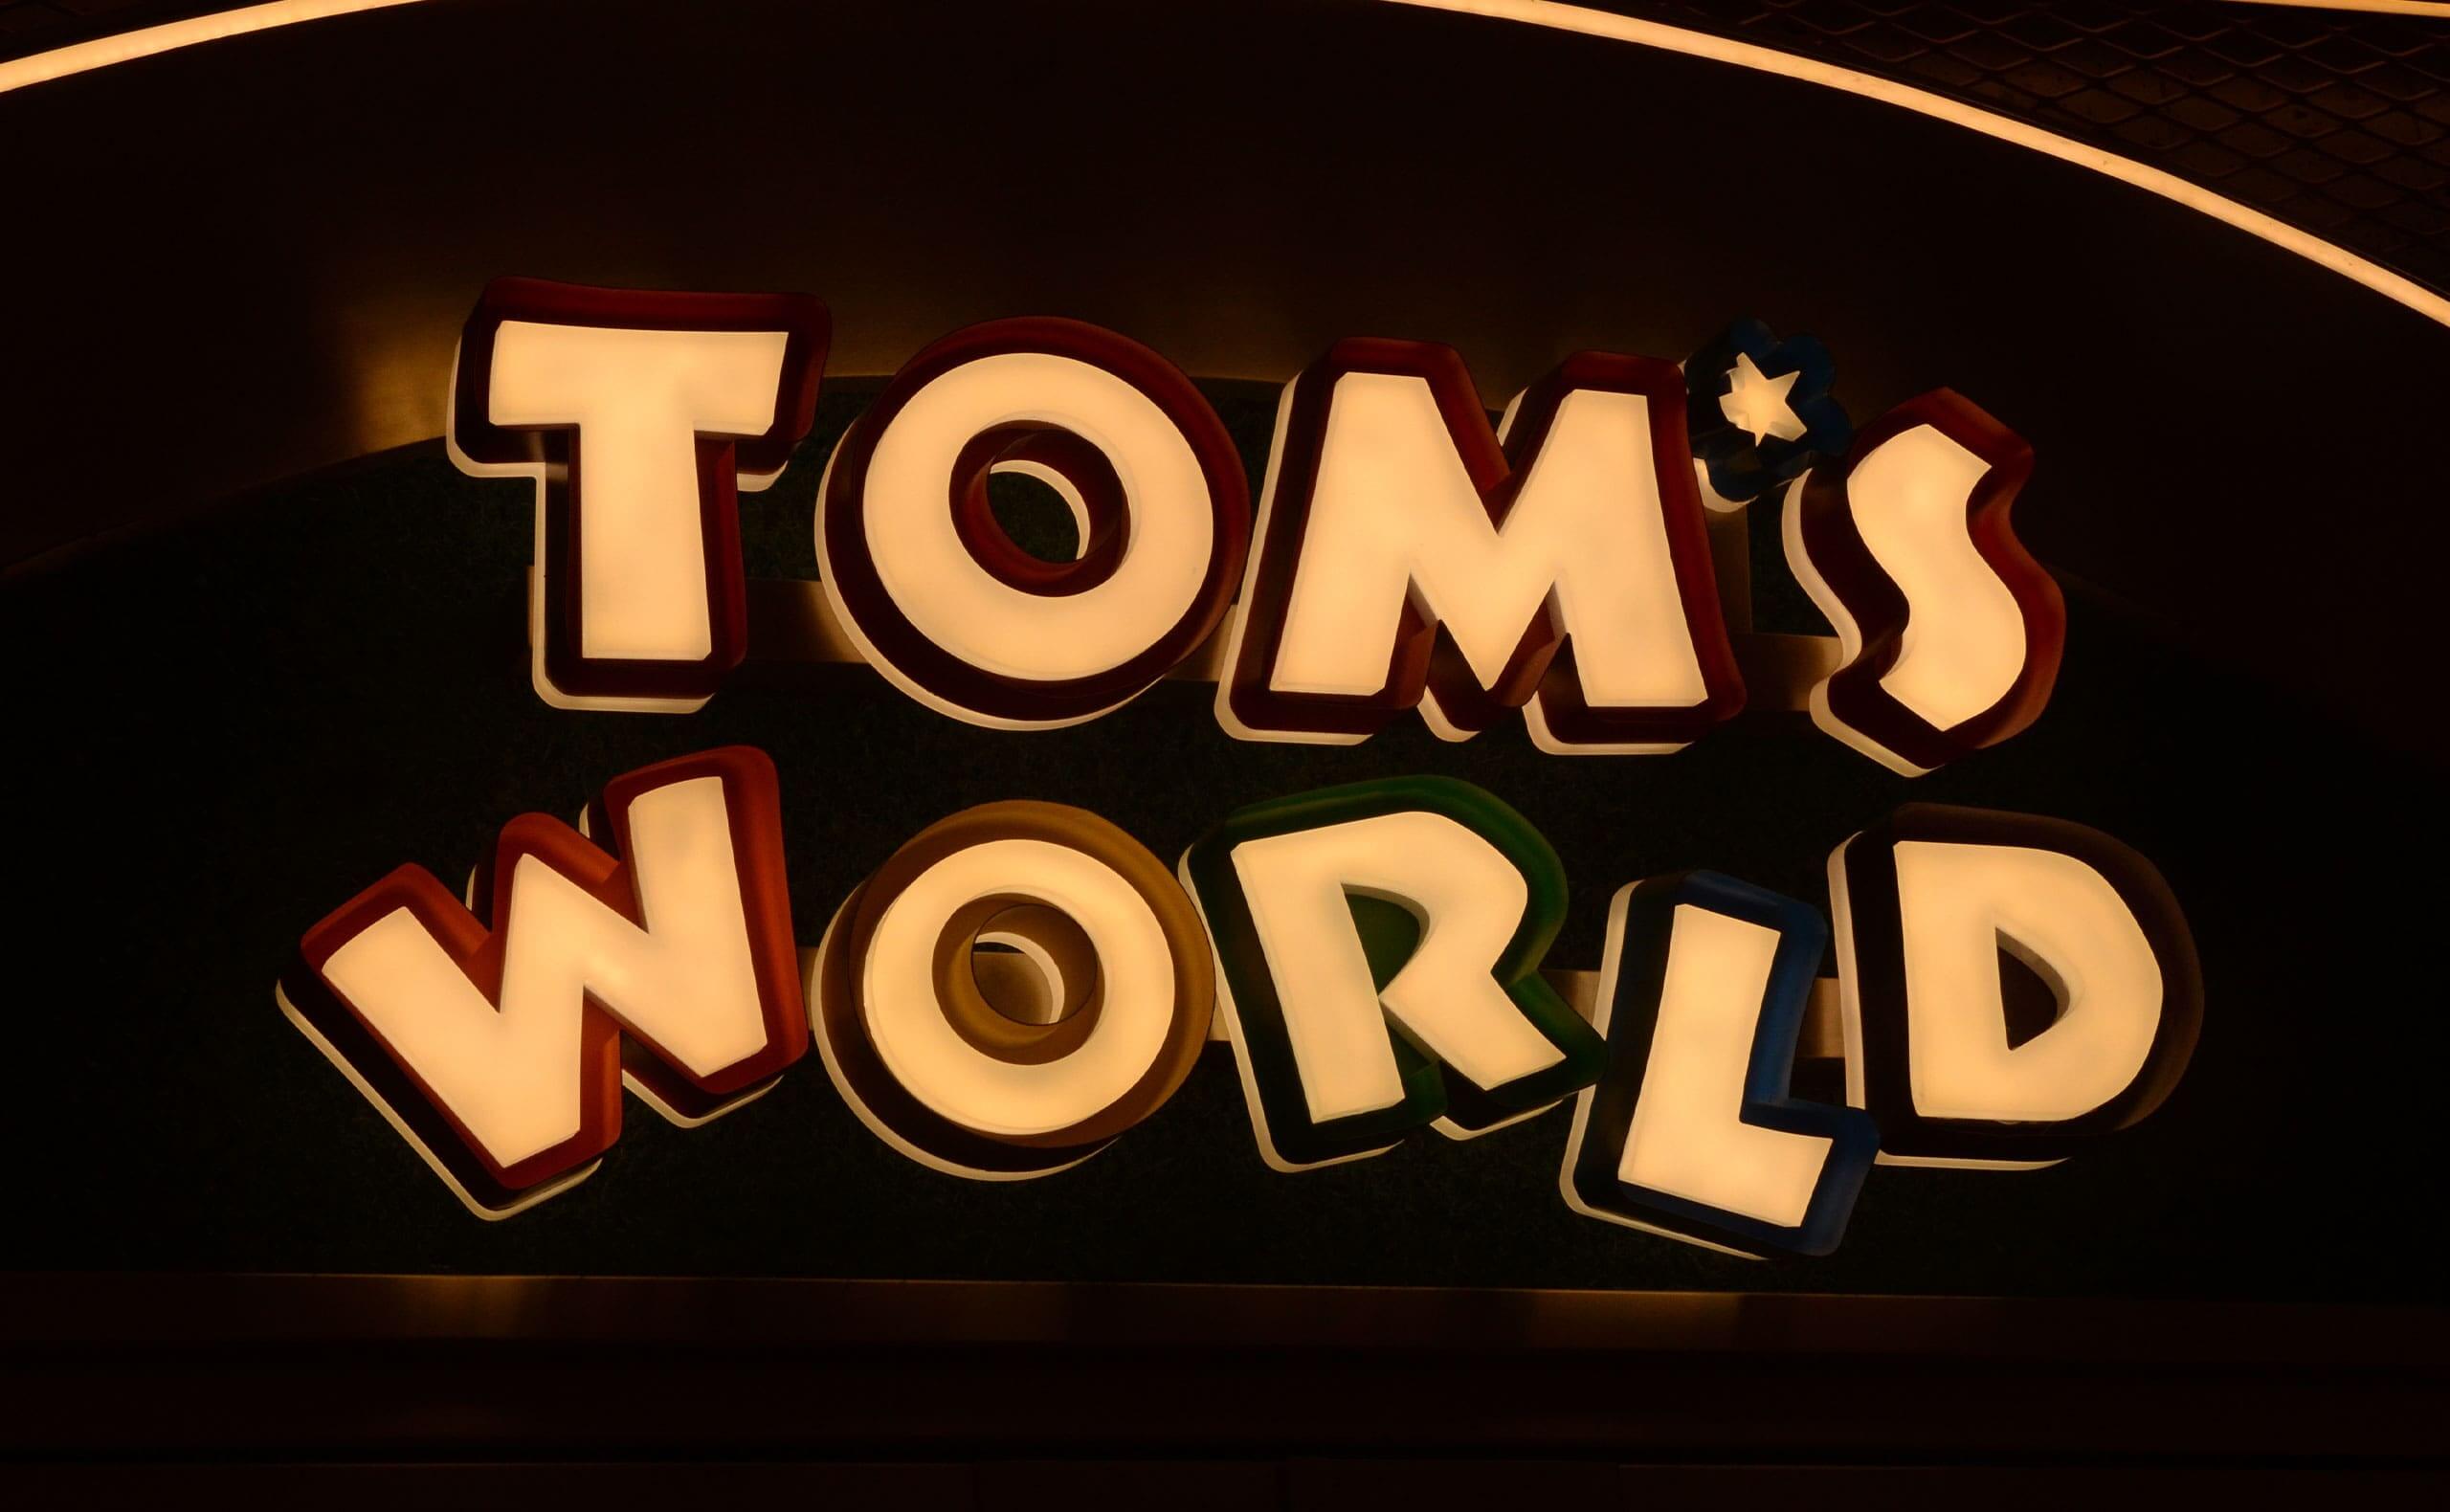 Metal Front and Backlit Channel Letters For Tom's World